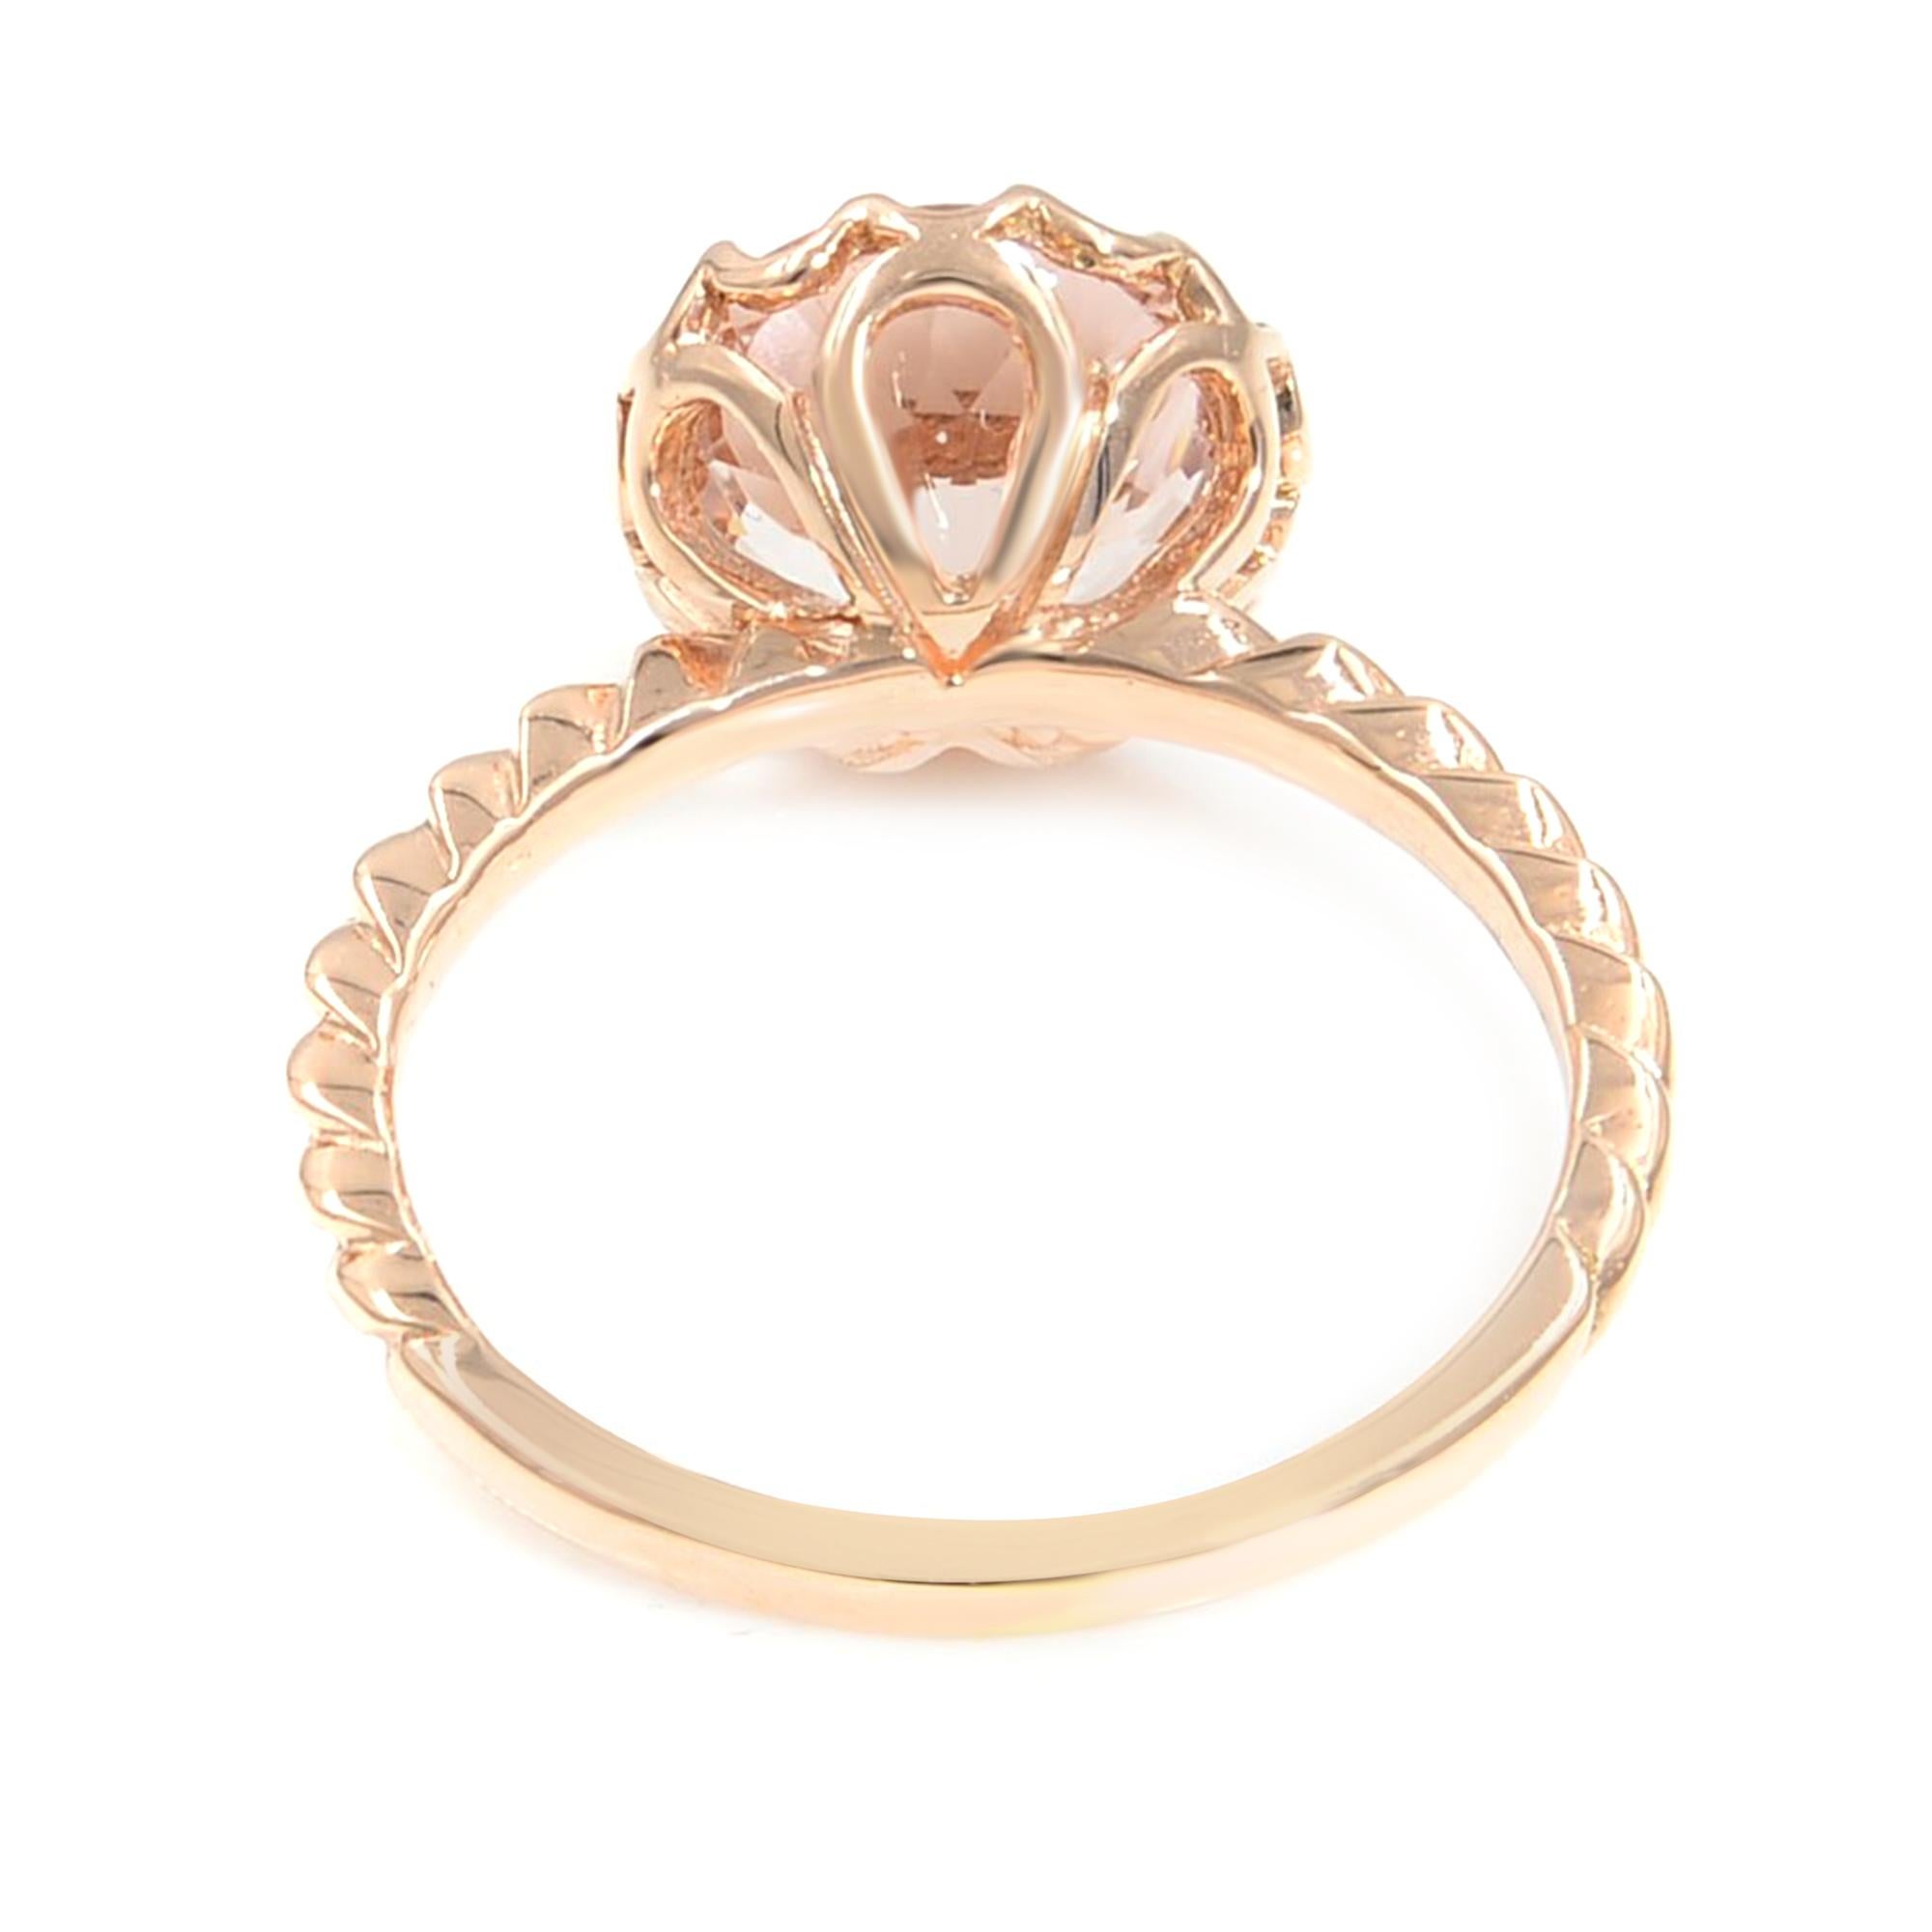 This beautiful solid 14k rose gold light pink/peach Morganite ring is simply gorgeous. The light color of the peach complements the rose gold perfectly. 
Condition: New
Morganite.....................8.5mm approx 
Quality..........................